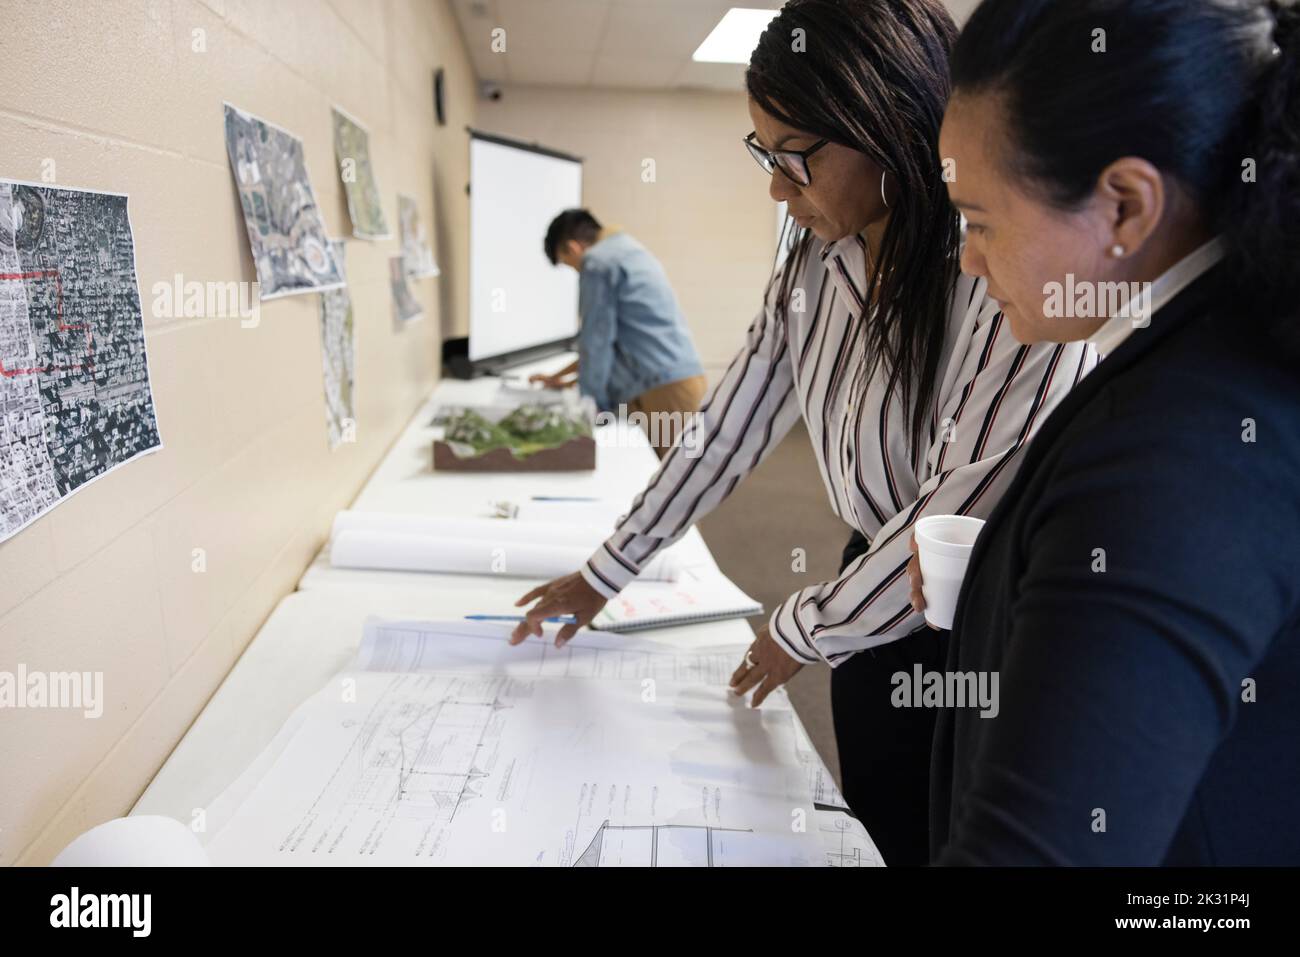 Women discussing blueprints in urban planning meeting Stock Photo